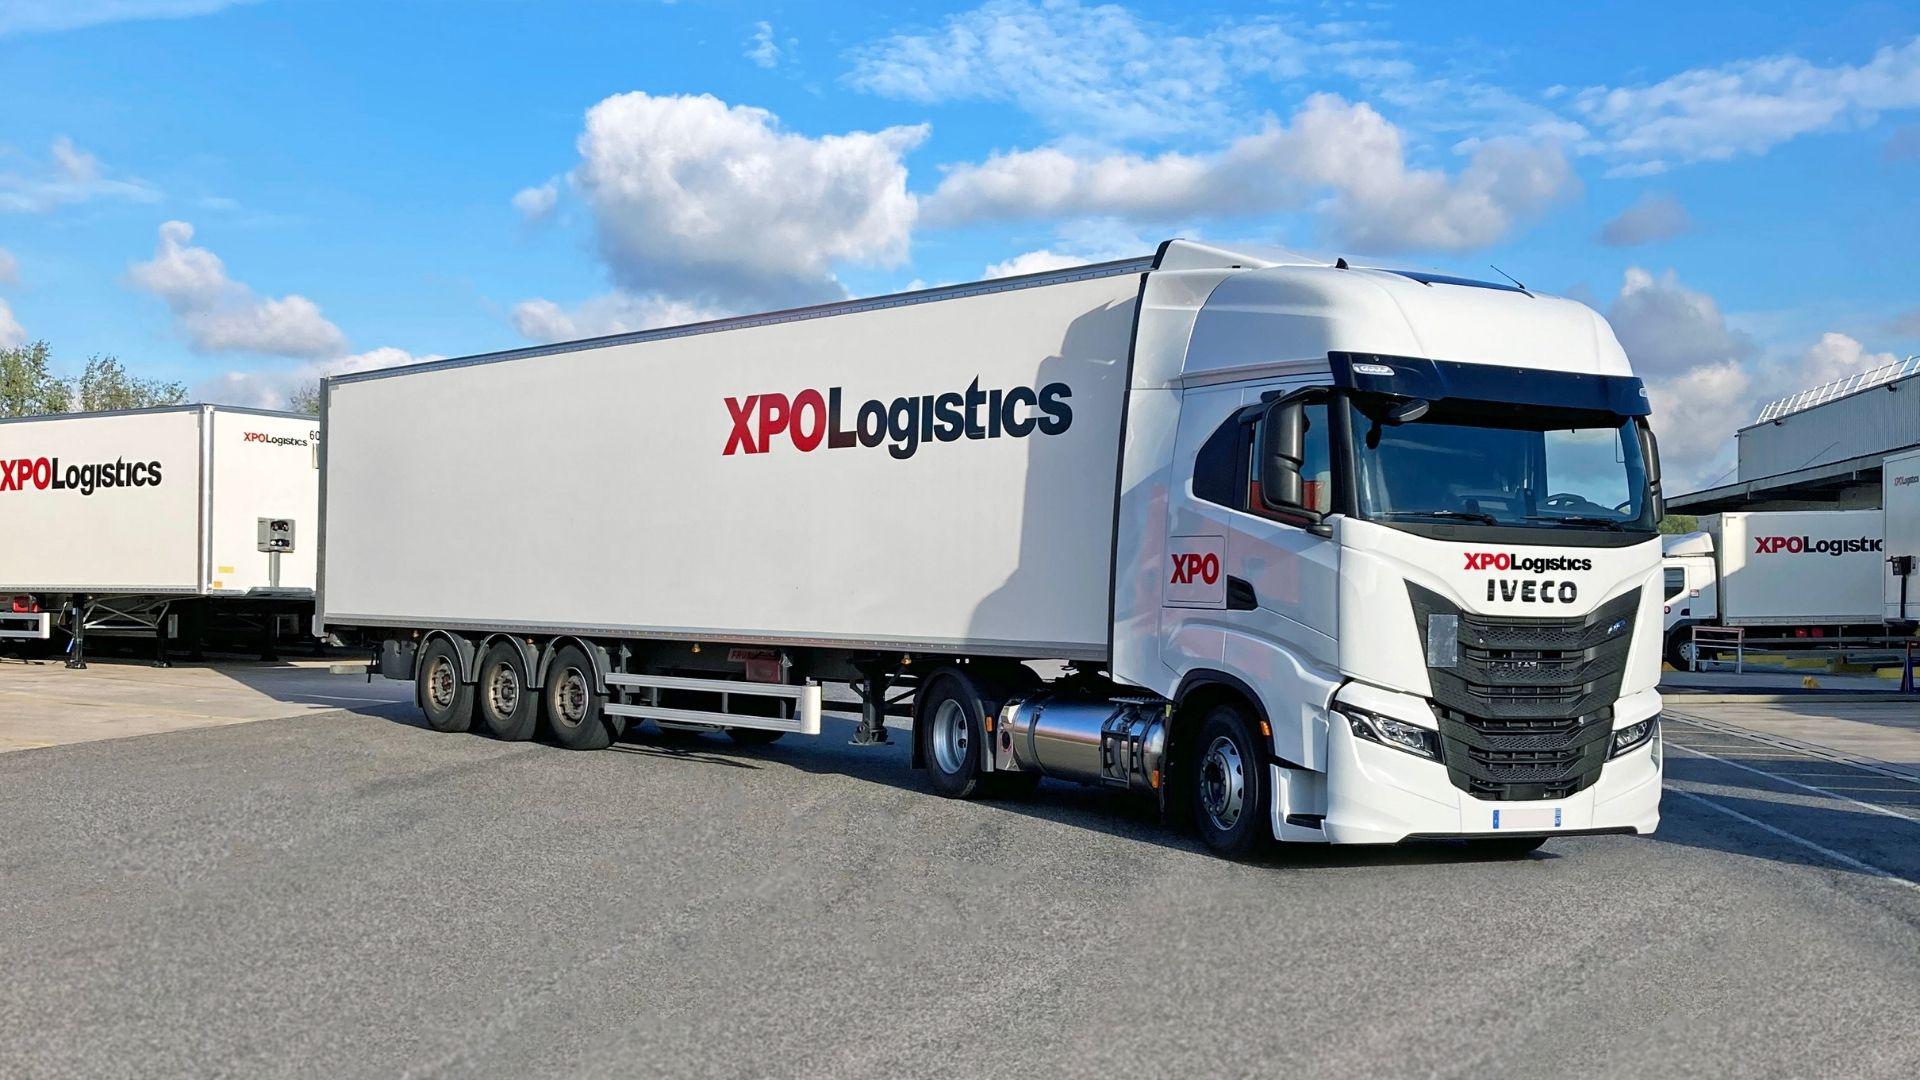 XPO Logistics Fleet Investments in France Focus on Sustainability